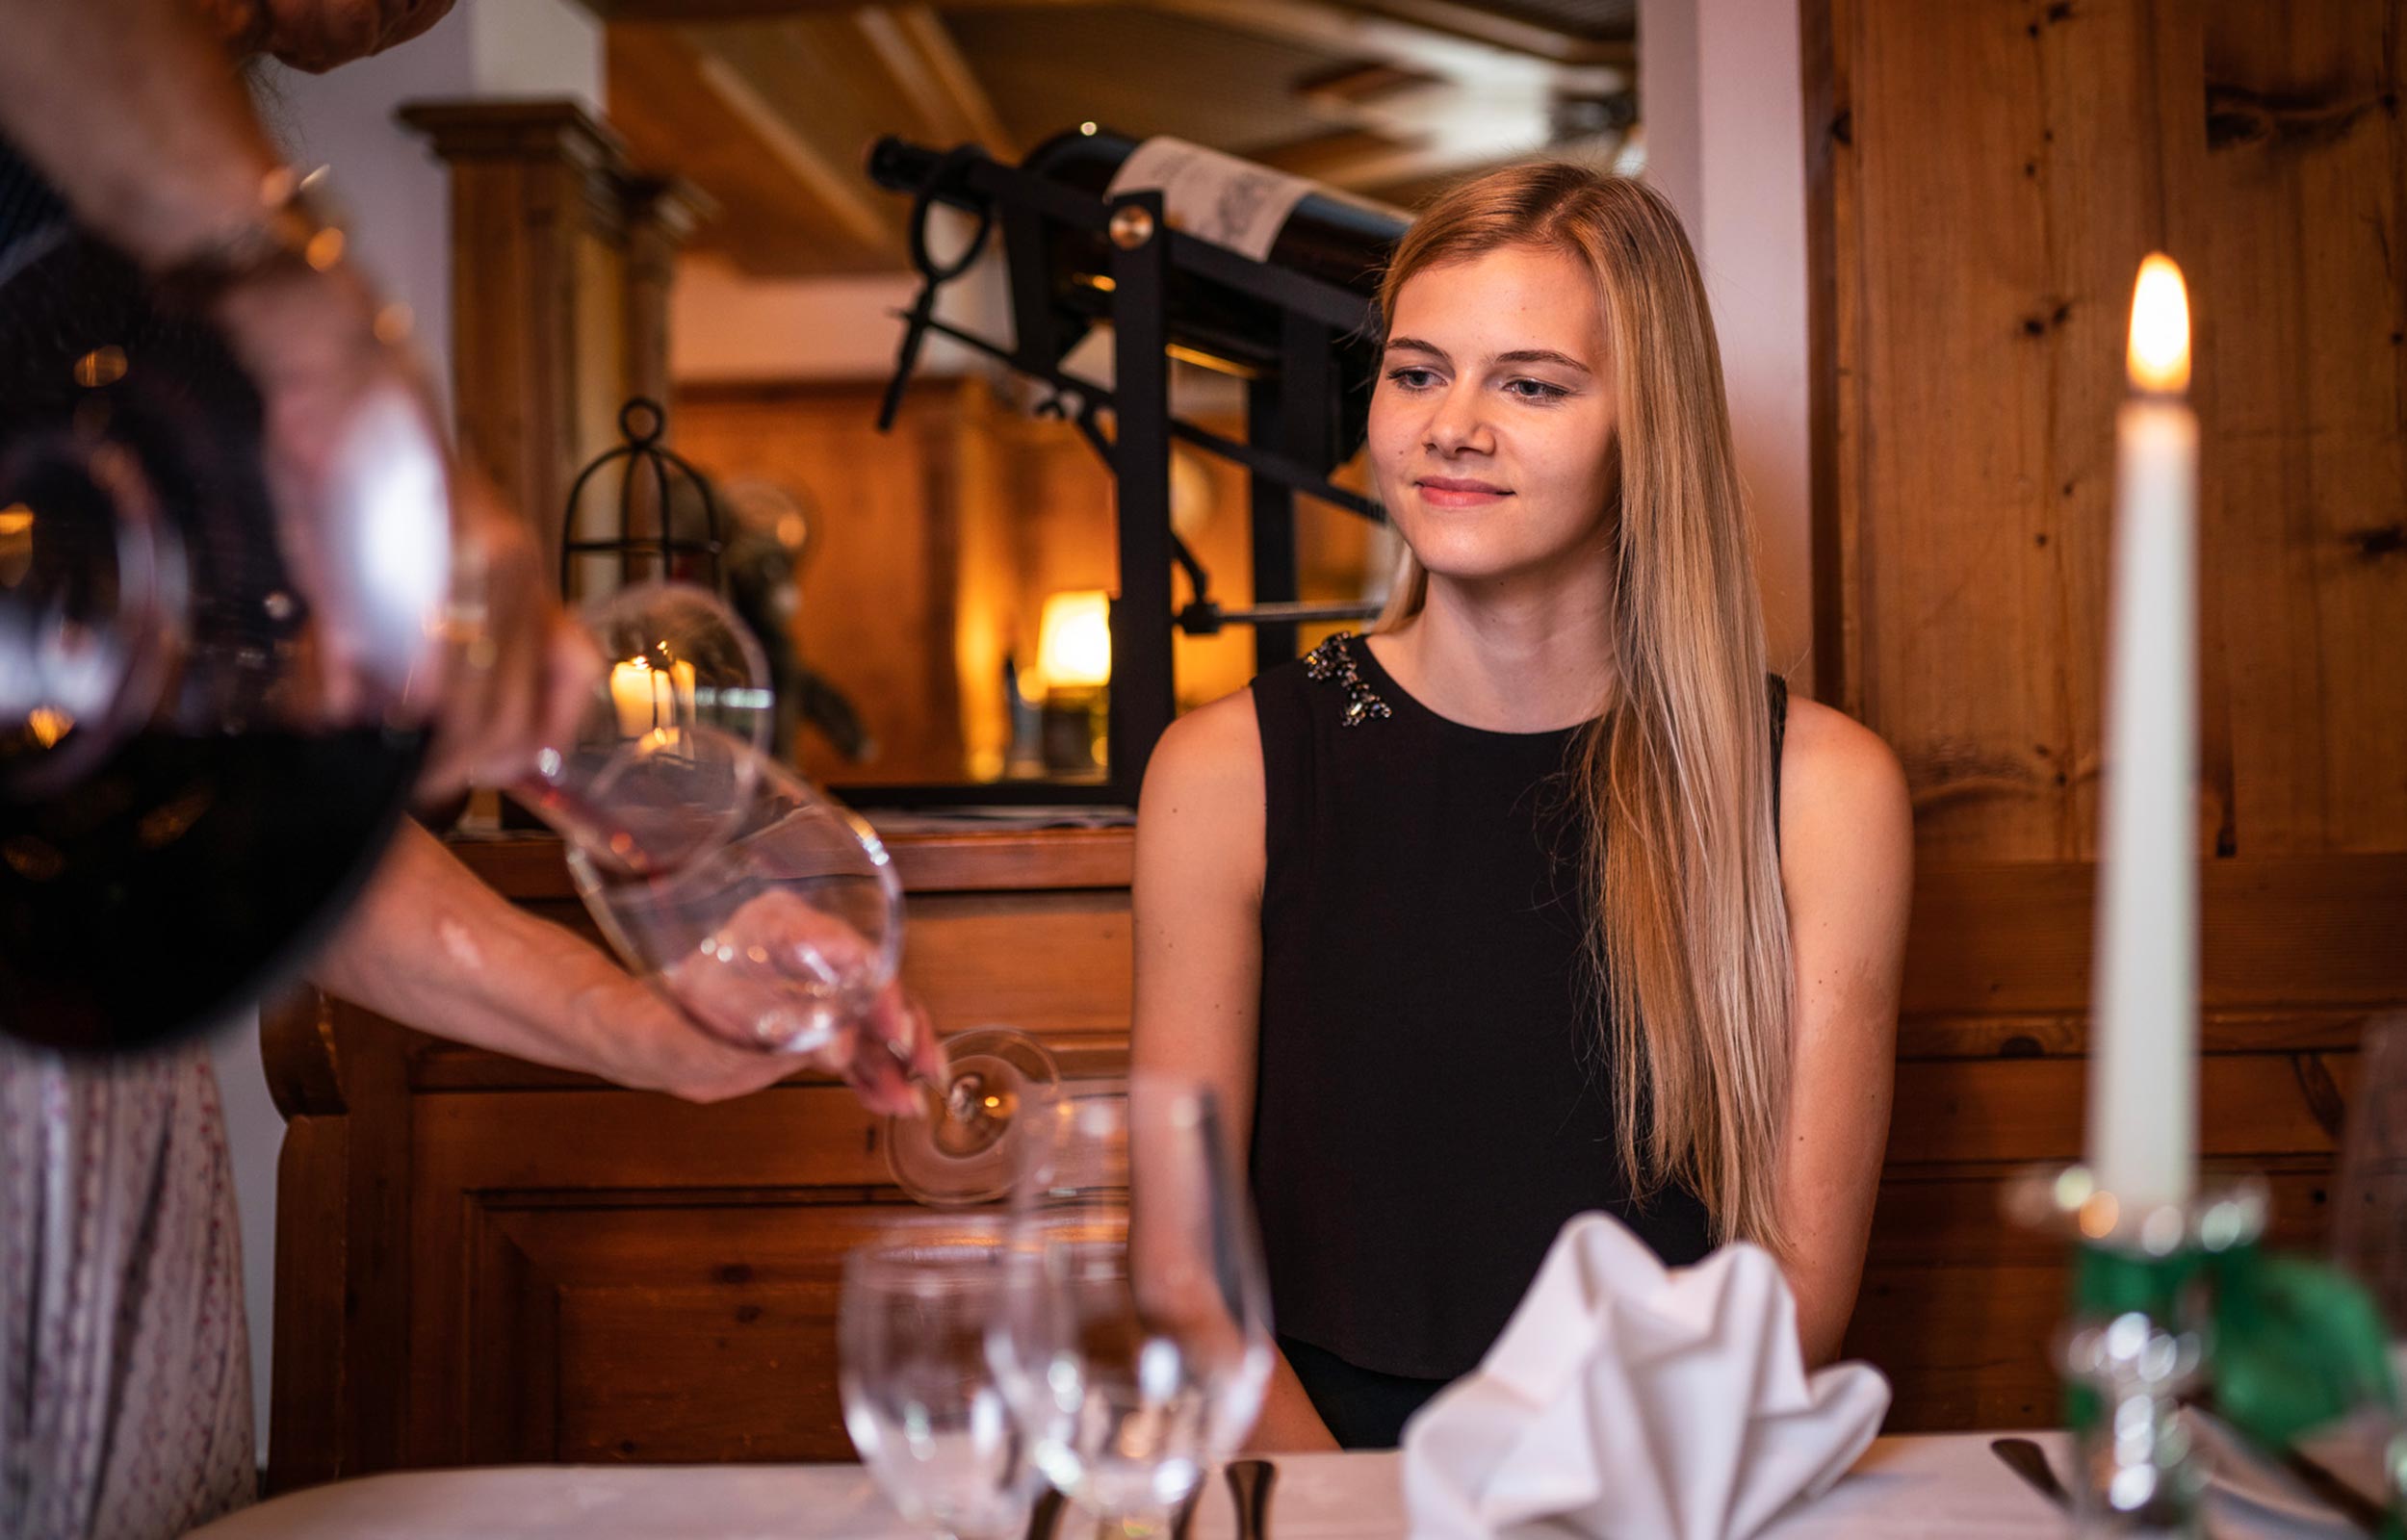 A woman with blond long hair watches a person pouring red wine into a wine glass.